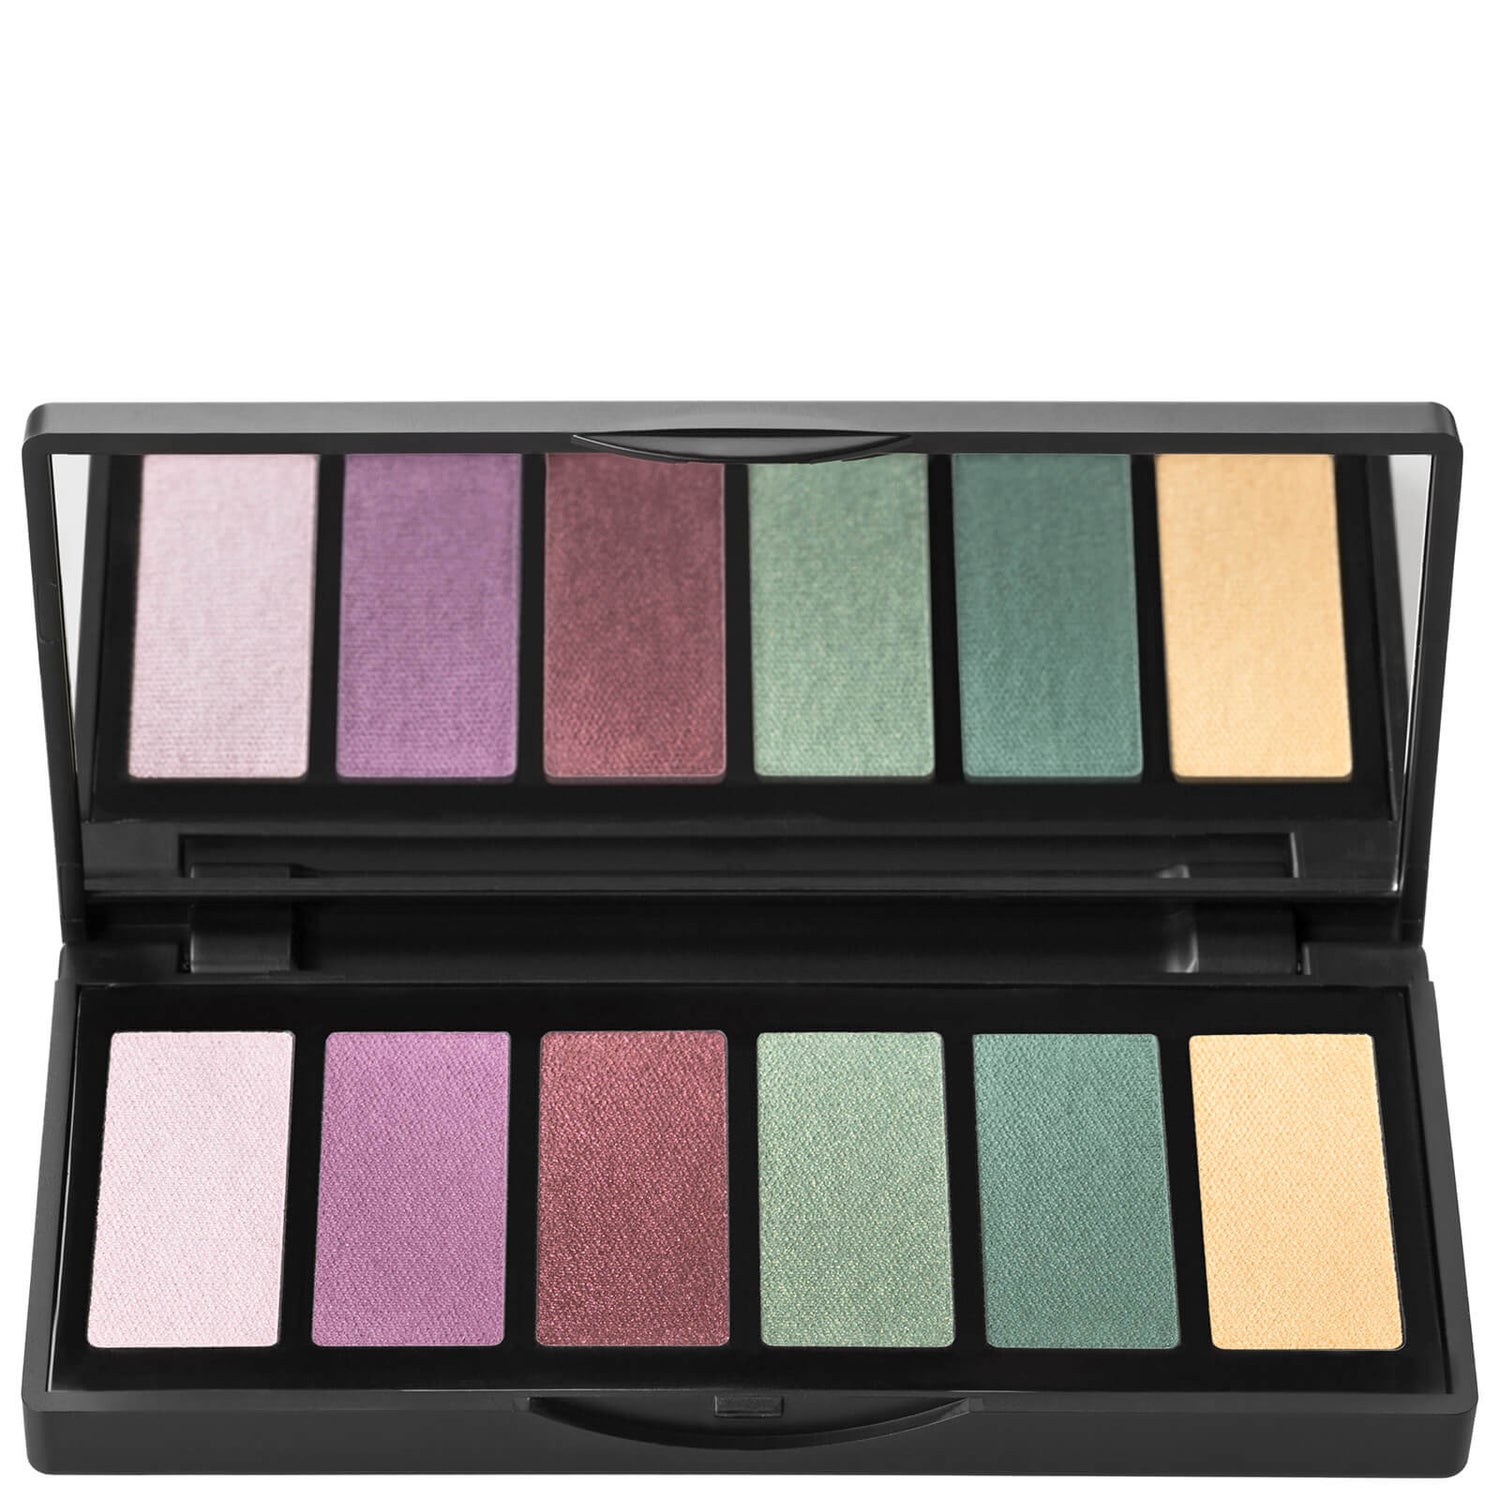 3INA Makeup The Eyeshadow Palette Multicolor/Red 6 g